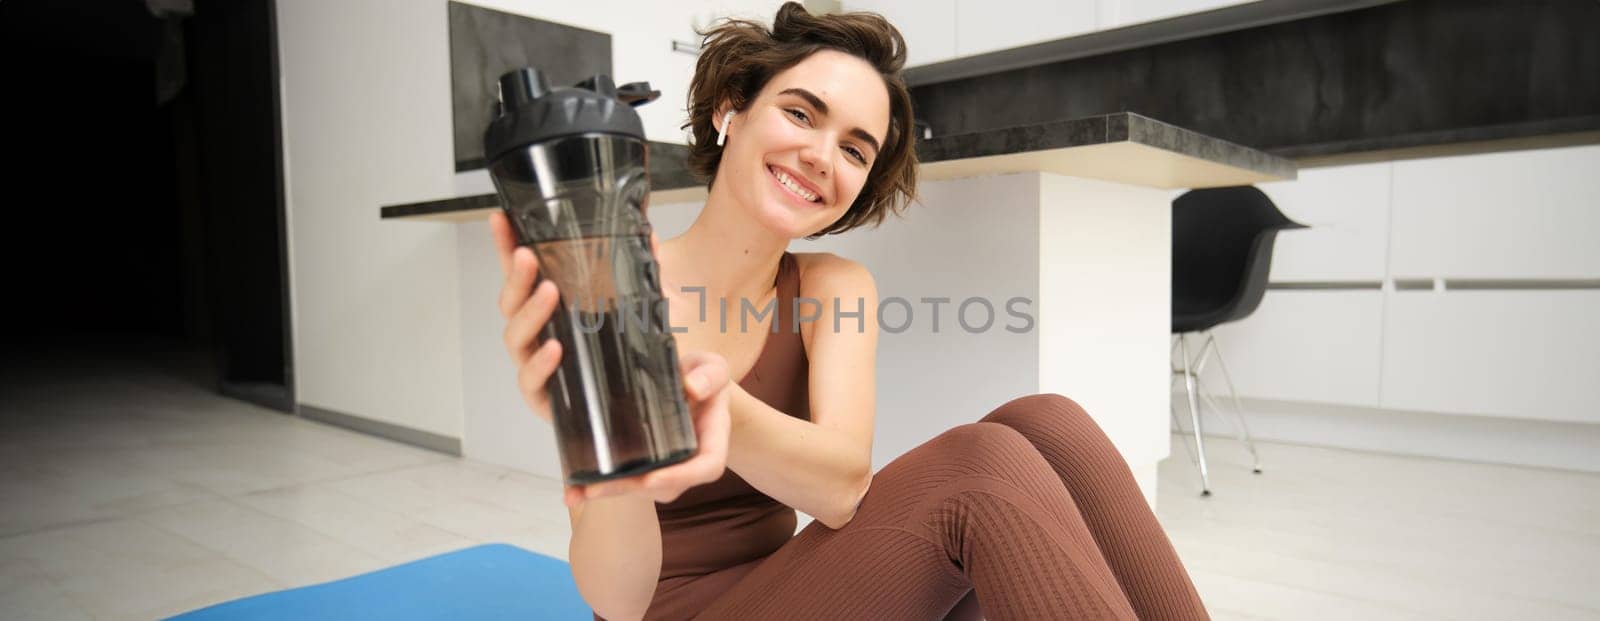 Smiling sportsgirl, woman after fitness training, gives you water bottle, stays hydrated after workout, sits on fitness yoga mat at home on floor.